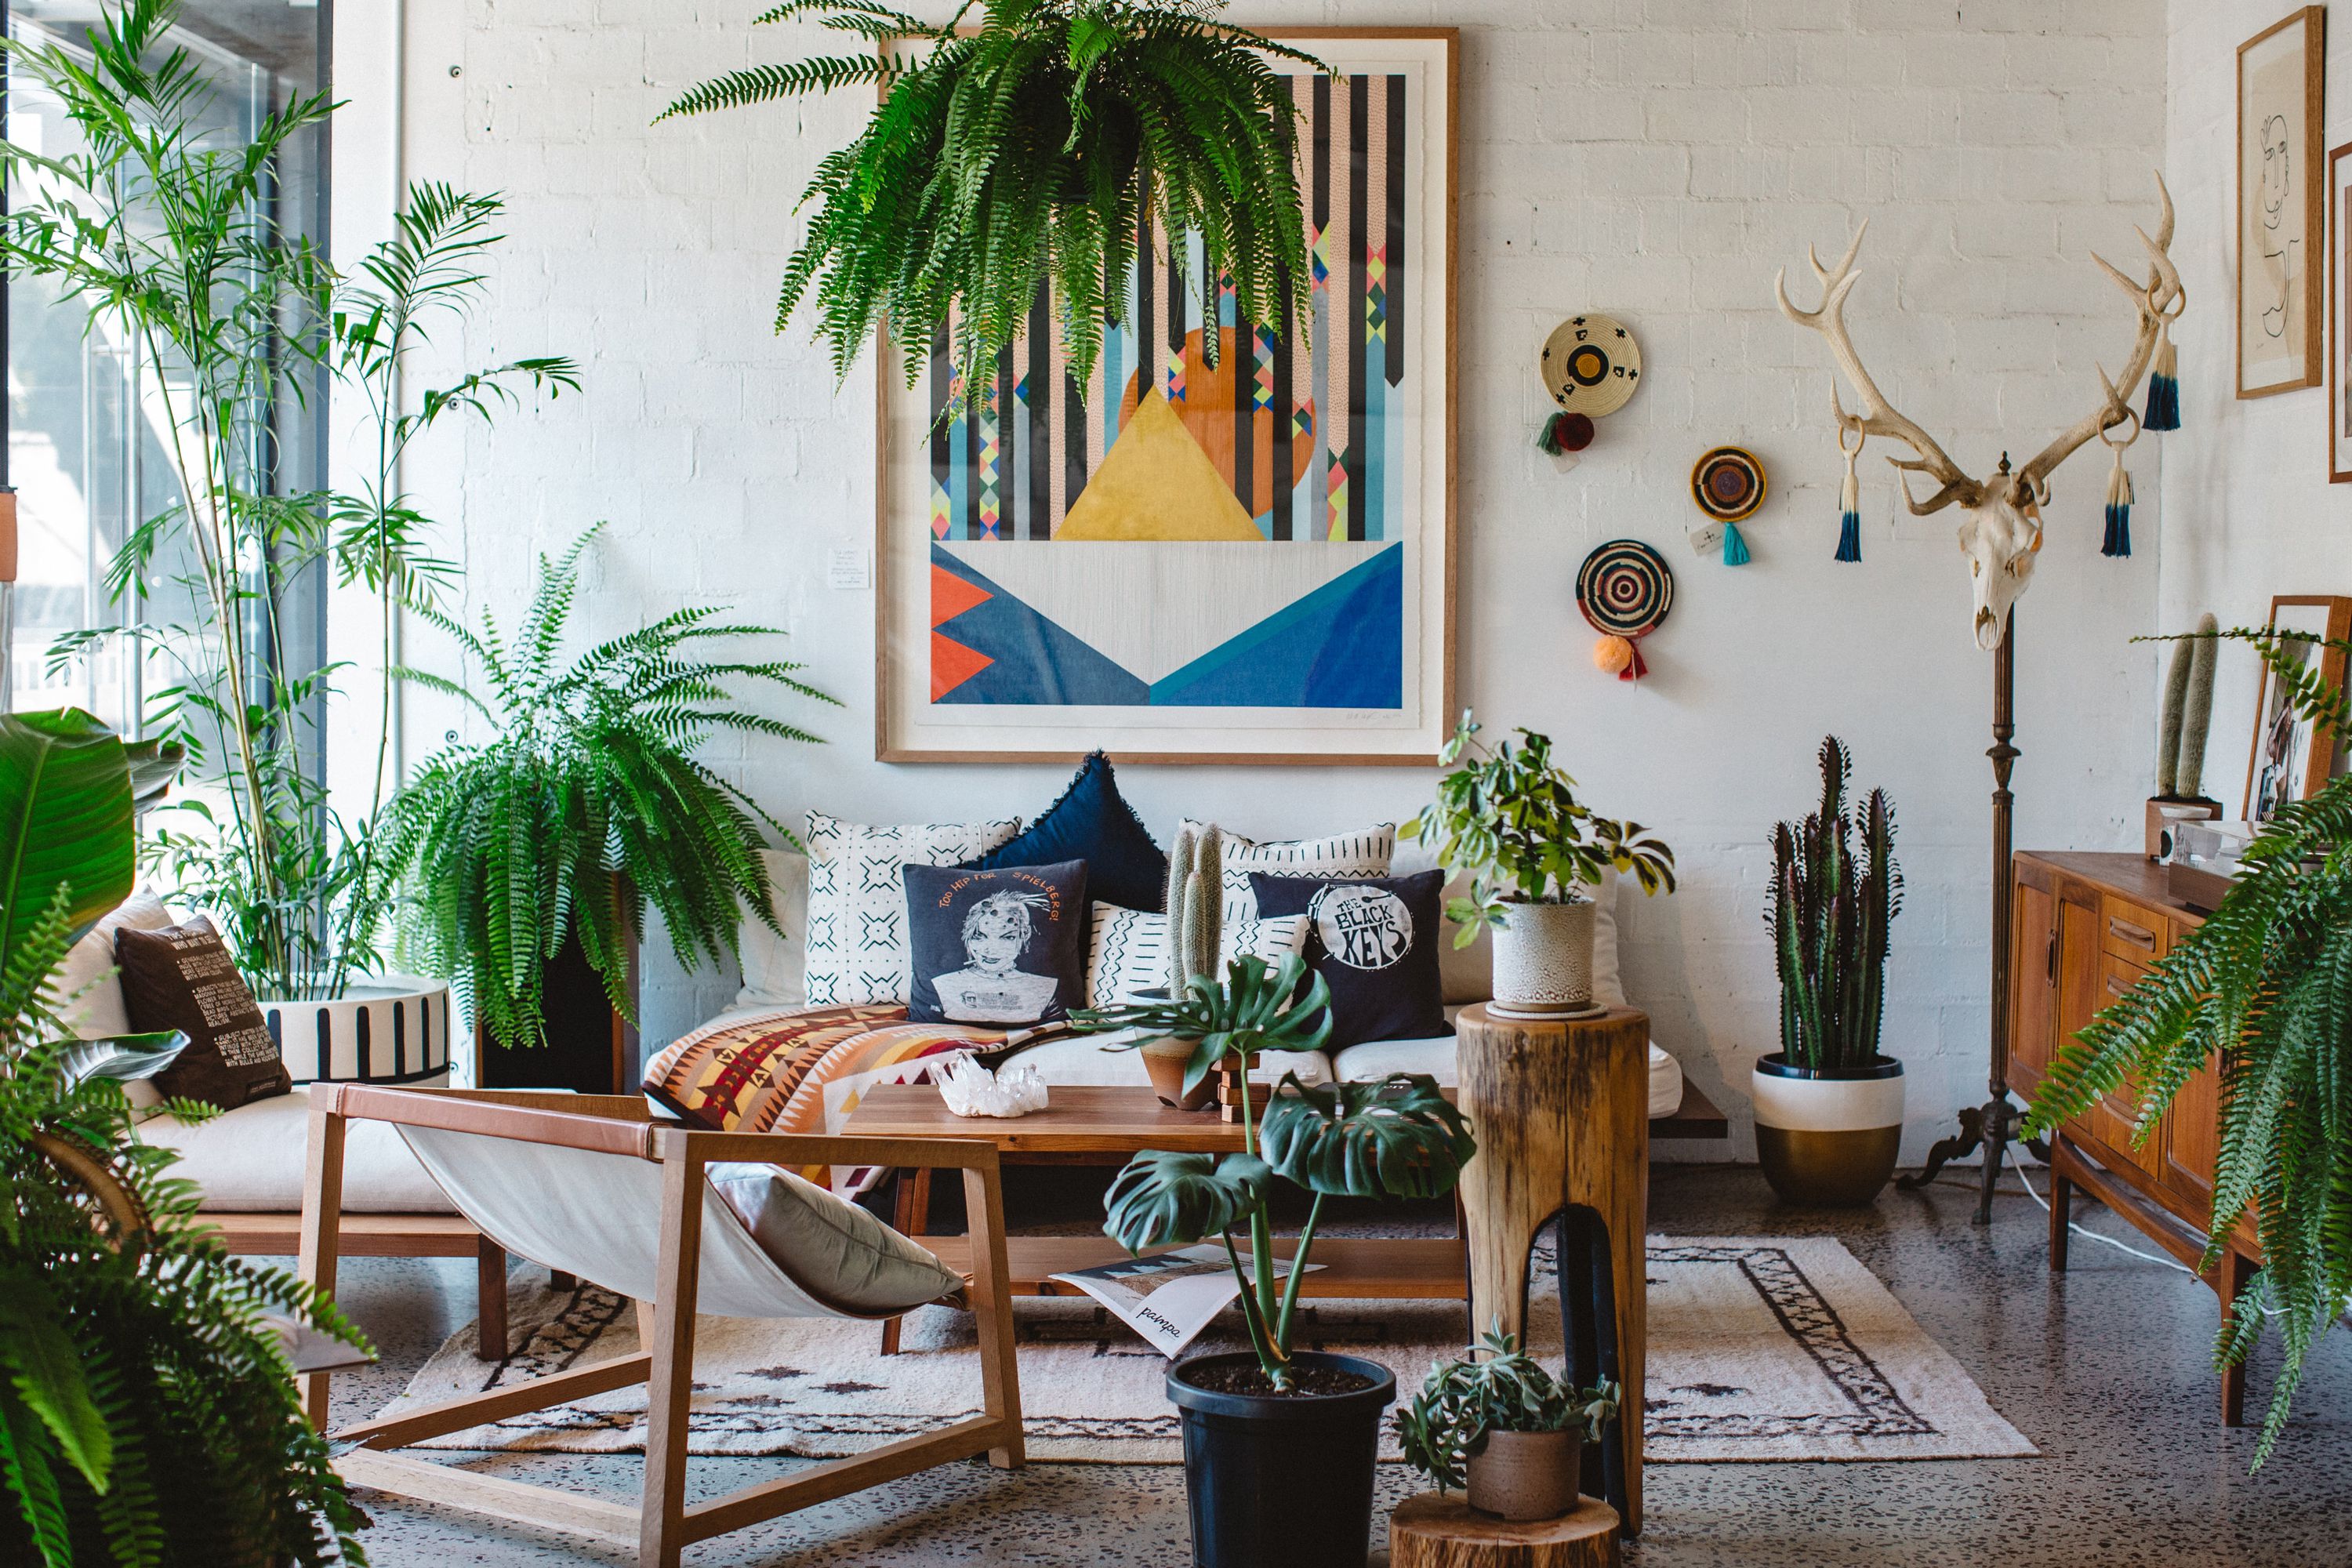 4 Tips to Decorate With Items From Your Travels